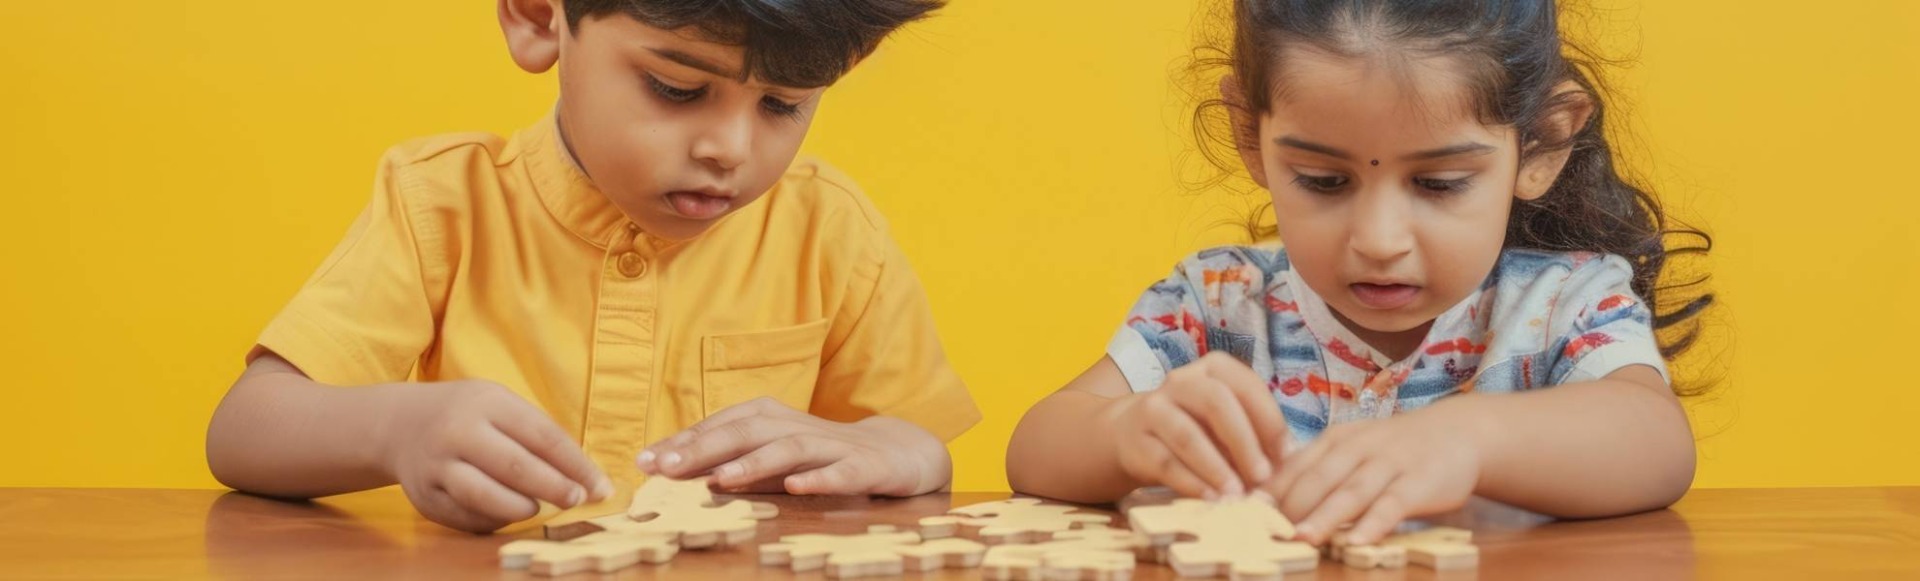 kids playing with puzzles for fun and brain development